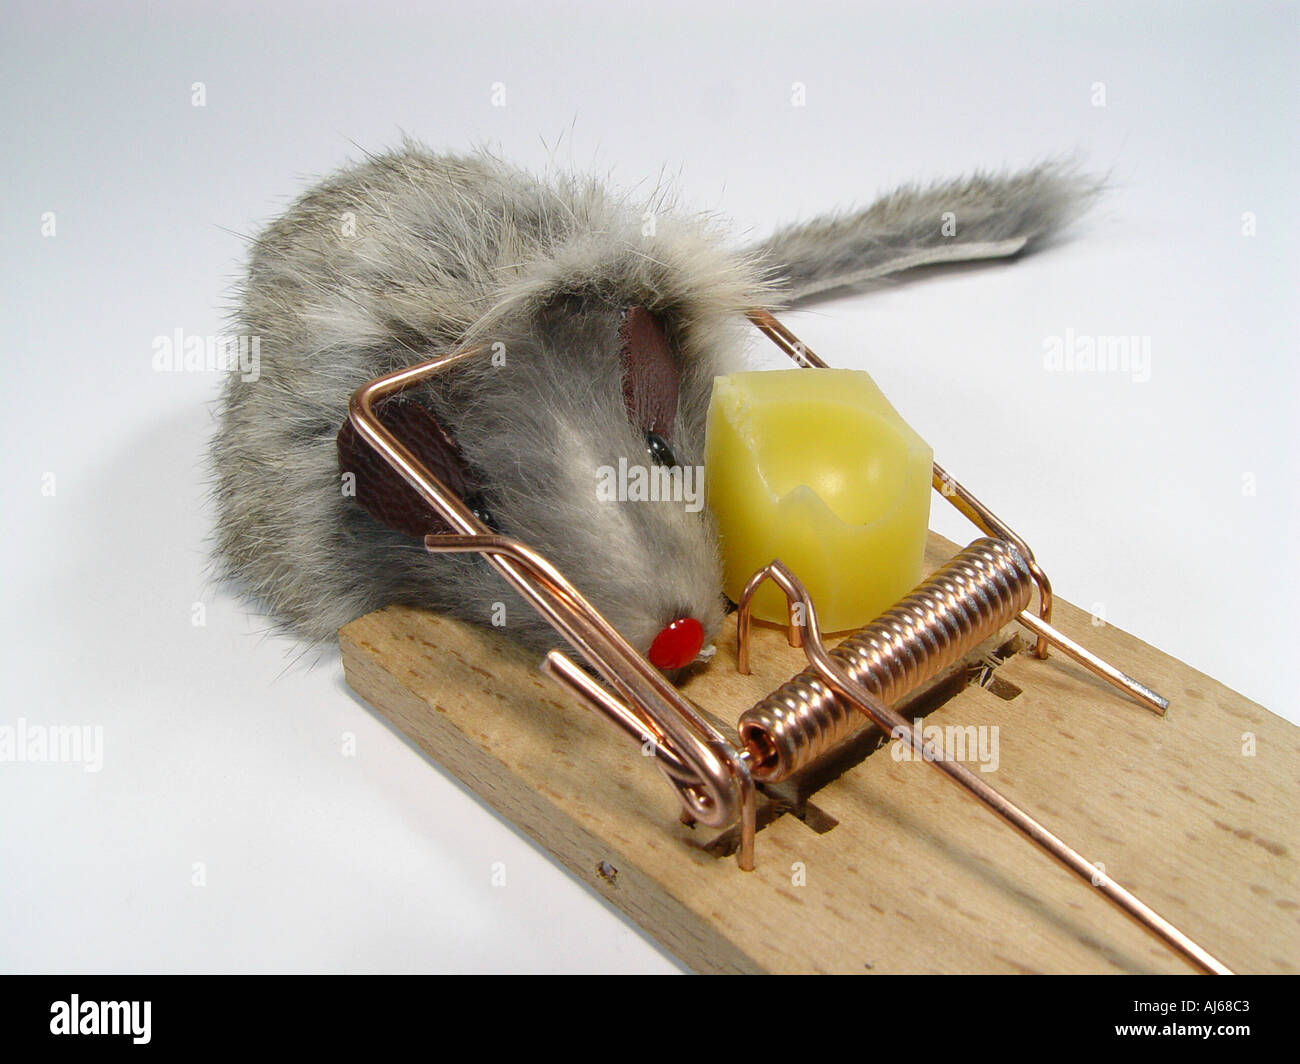 https://c8.alamy.com/comp/AJ68C3/mouse-in-the-mousetrap-symbol-for-into-the-trap-go-losing-transaction-AJ68C3.jpg